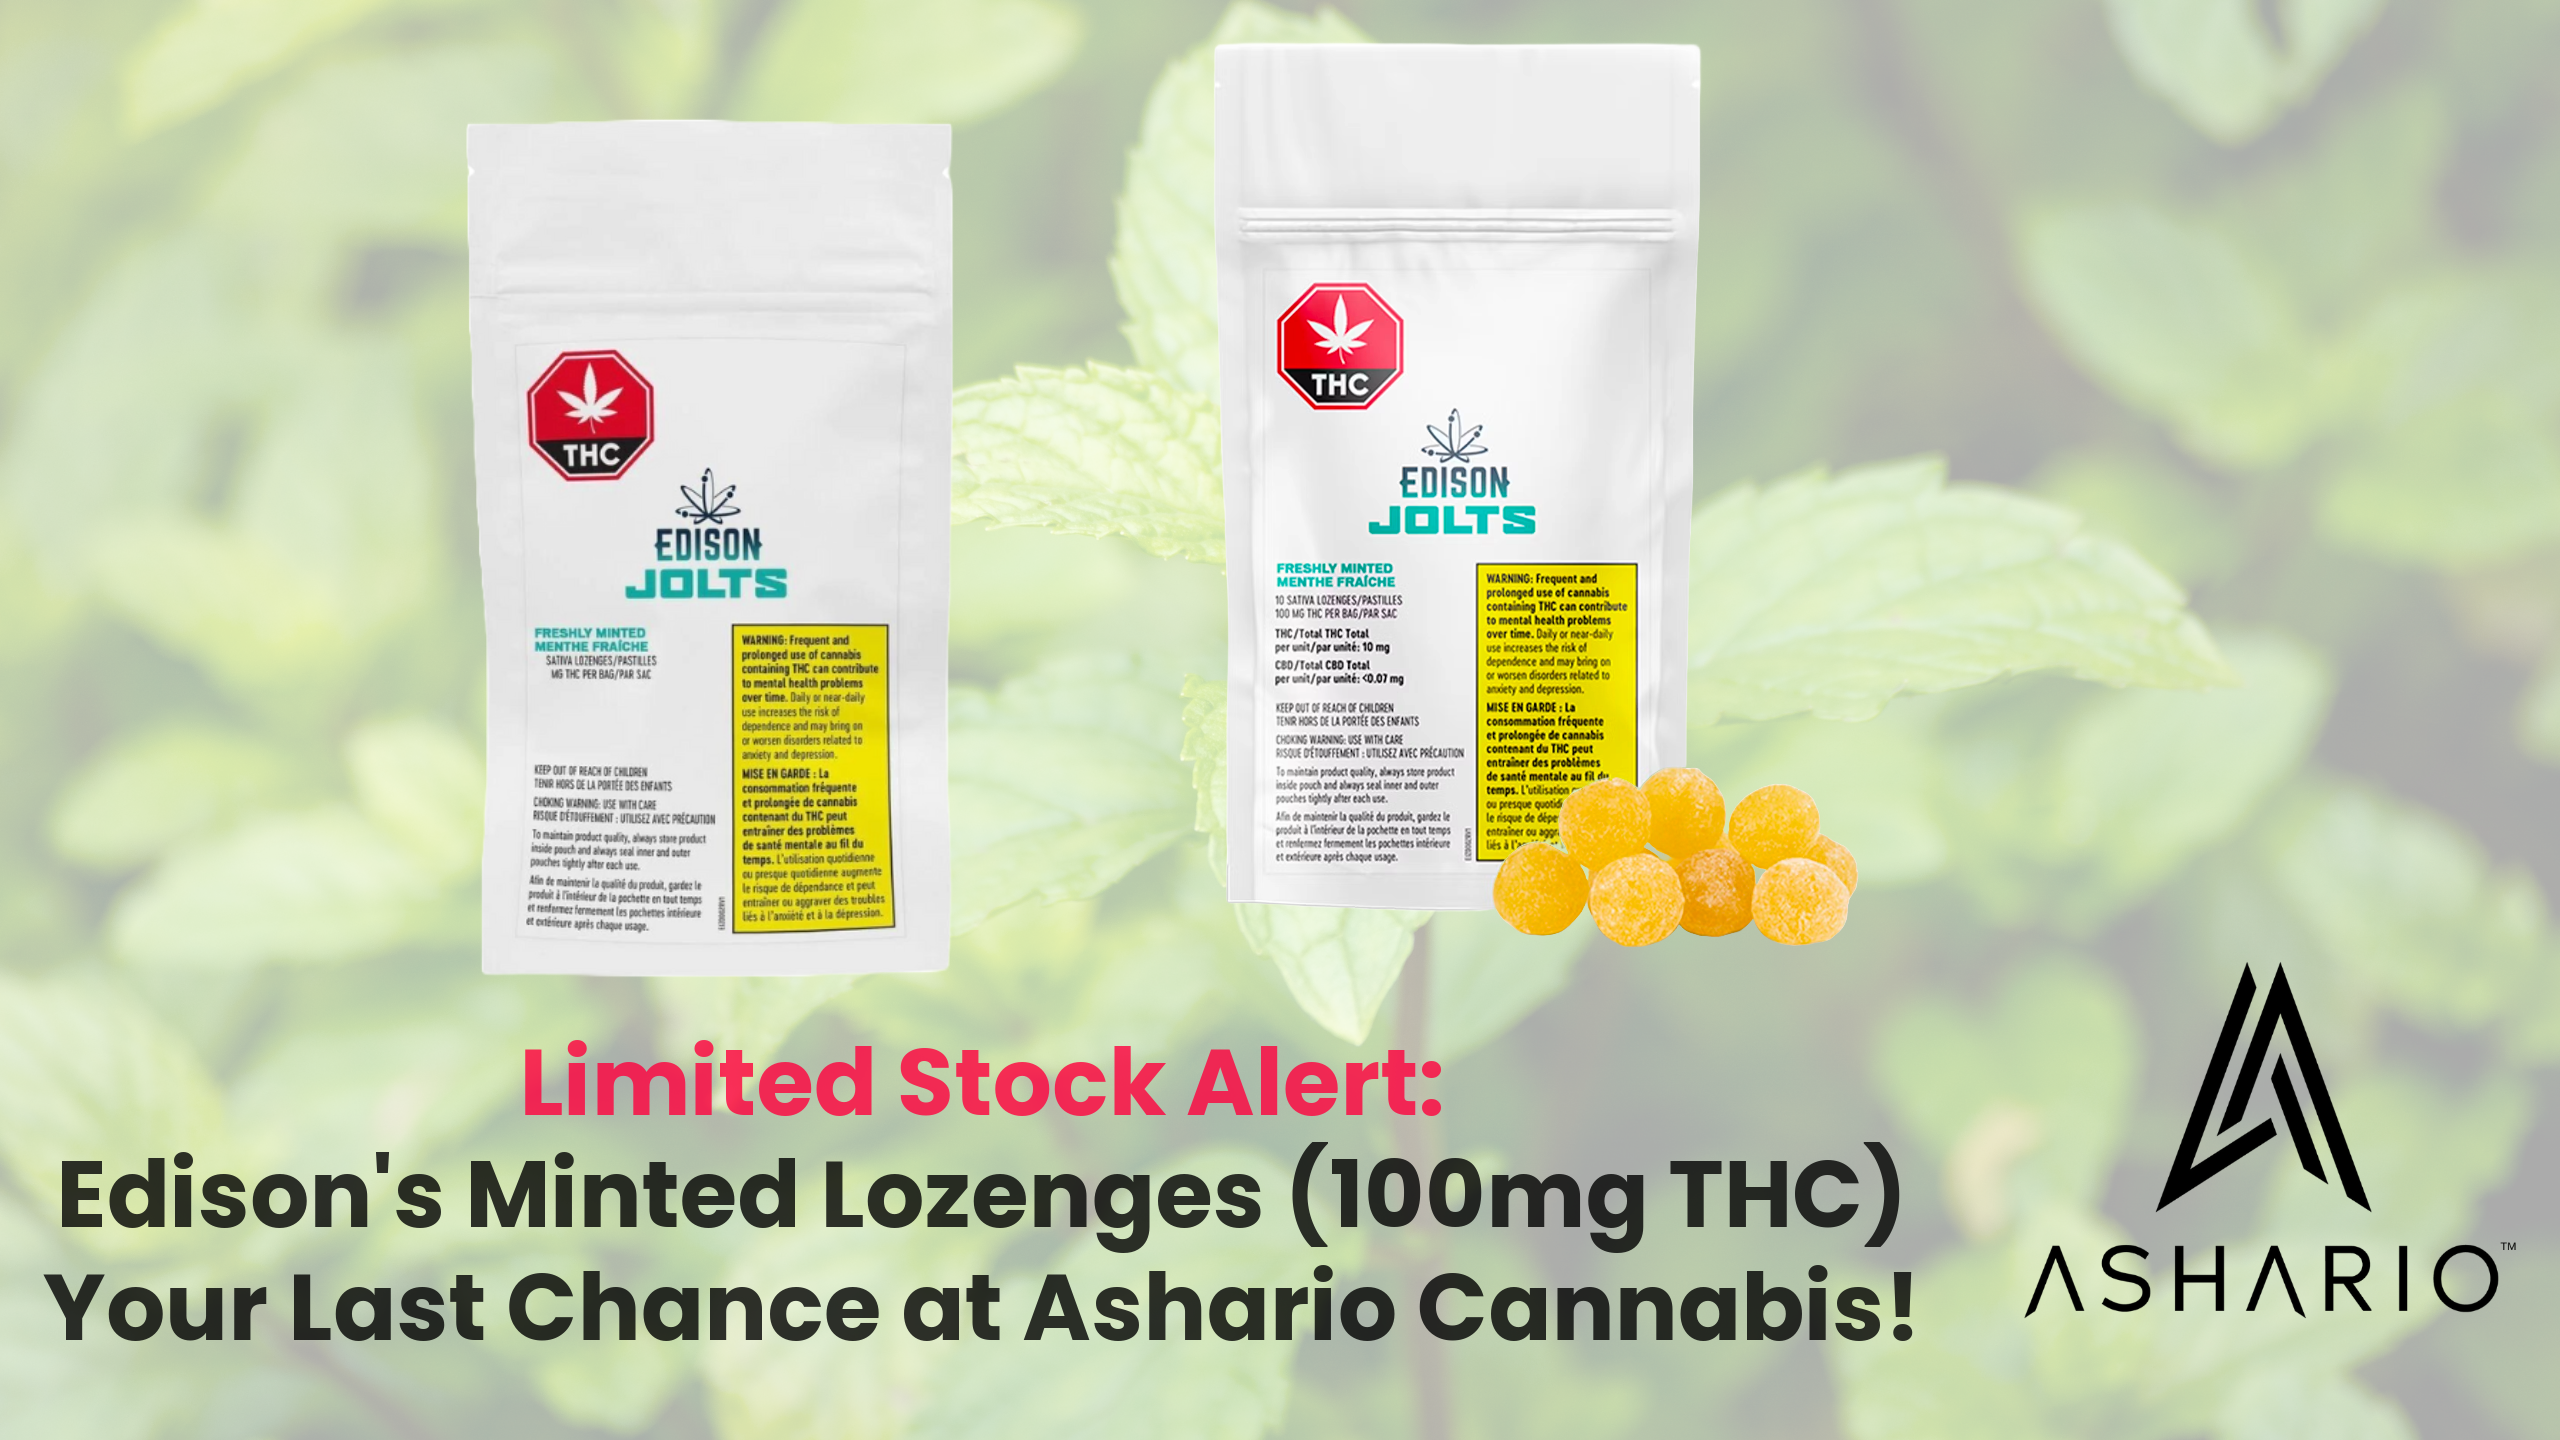 Savor the cool and invigorating taste of Freshly Minted Lozenges from Edison Jolts, each infused with a potent 100mg THC.